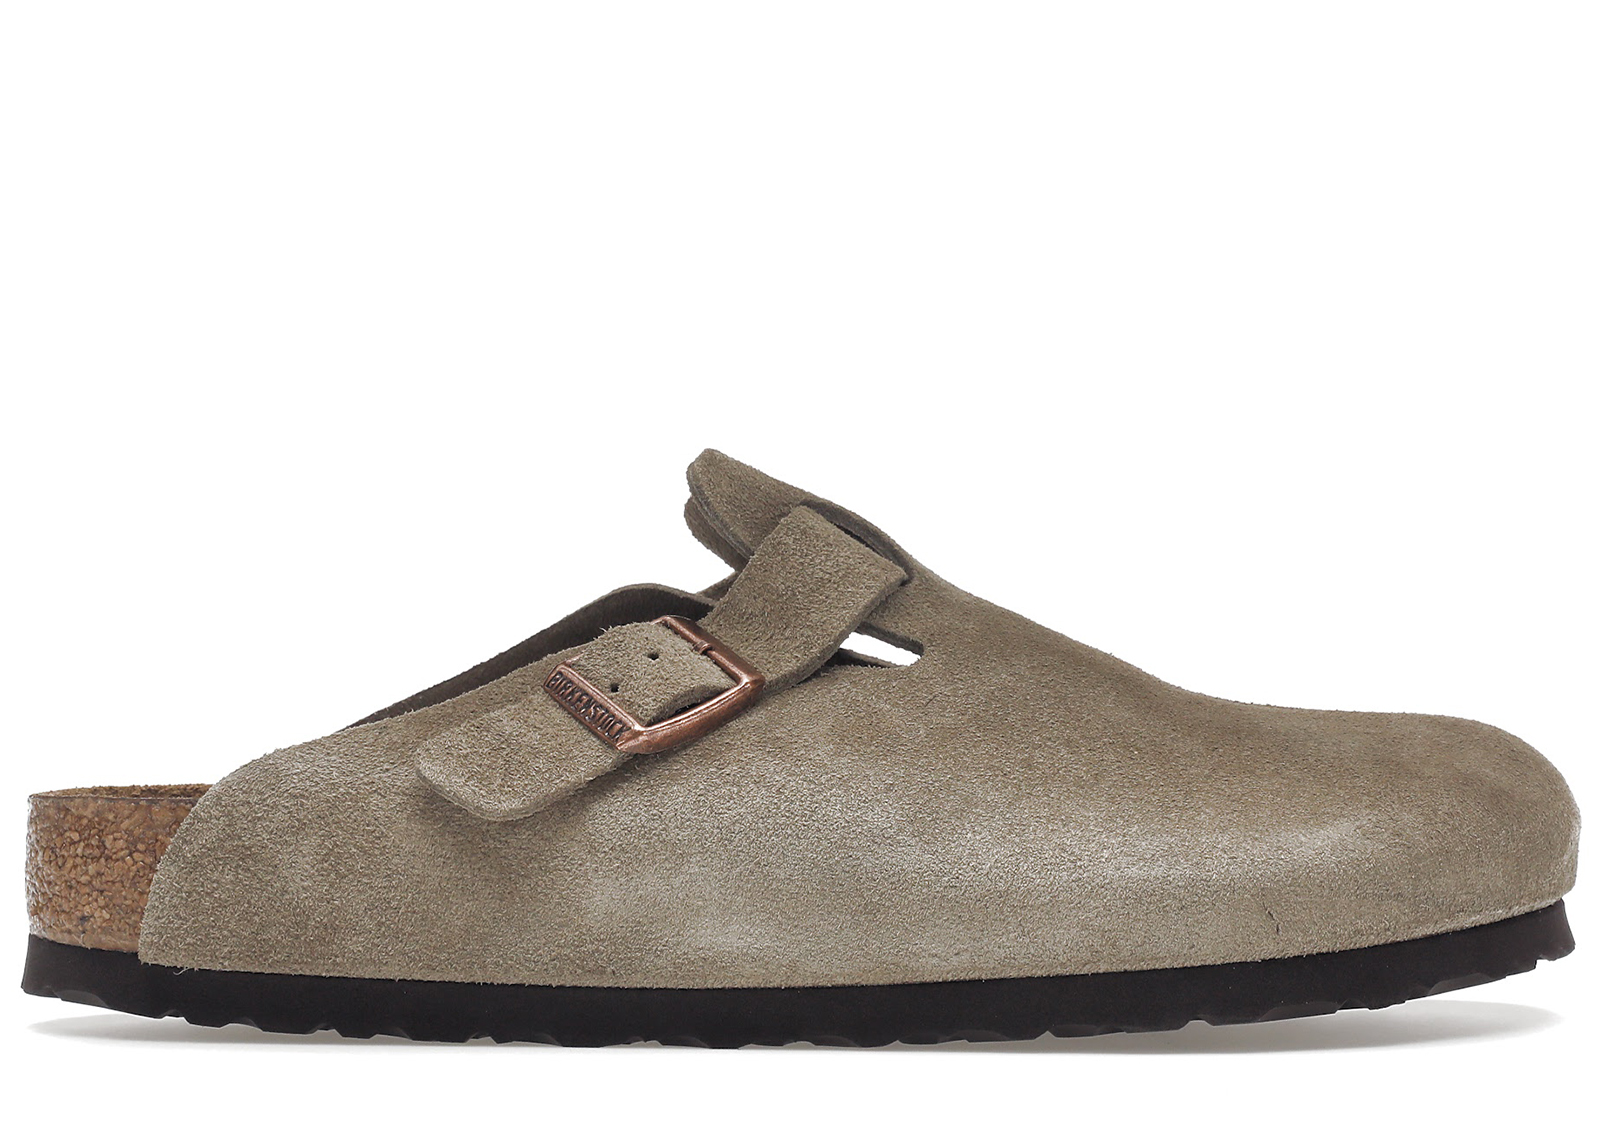 Birkenstock Boston Soft Footbed Suede Taupe